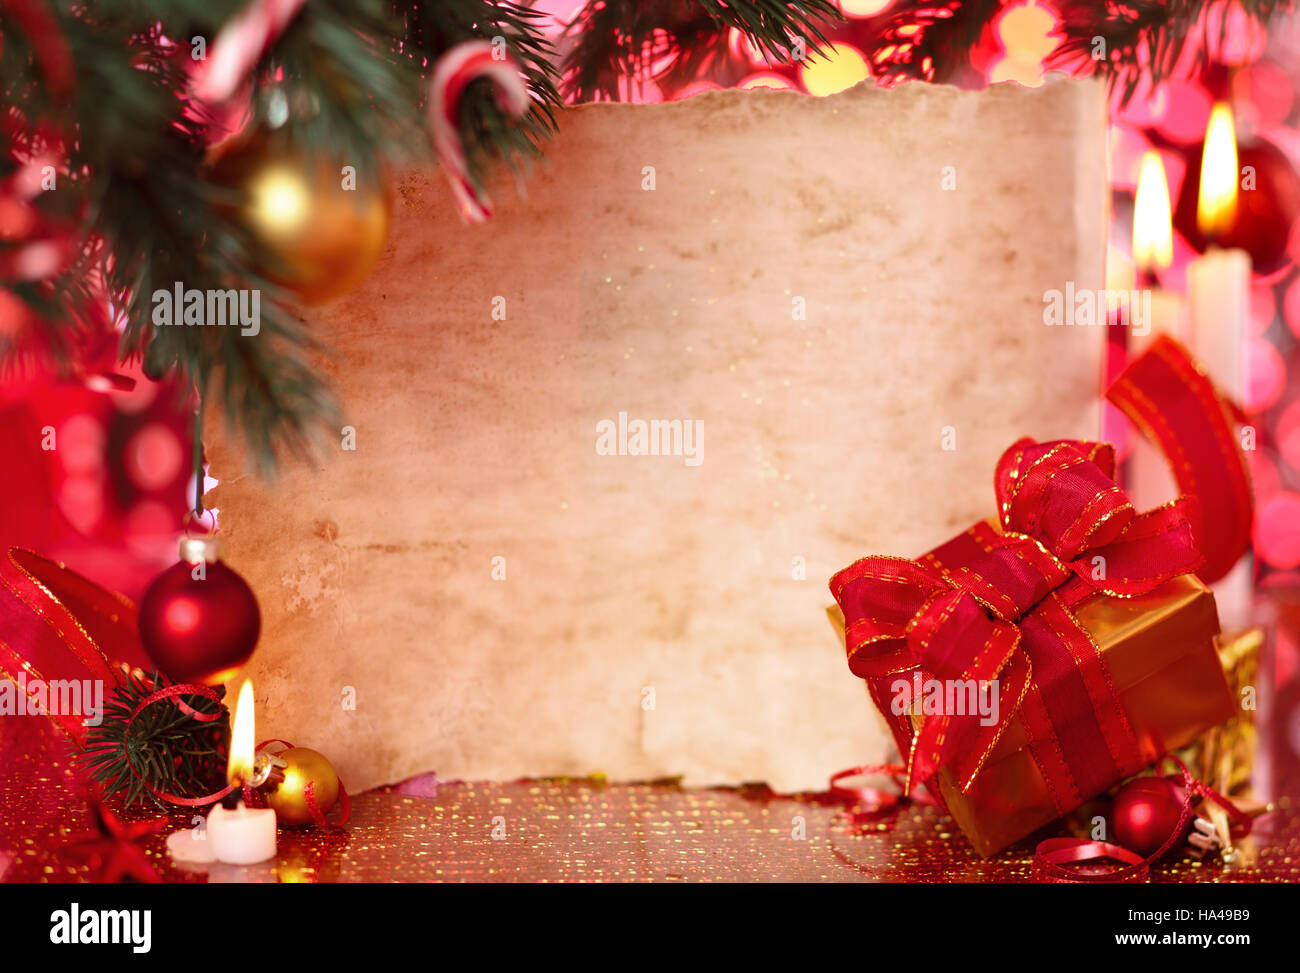 Christmas Concept On Aged Parchment Paper Stock Photo 162115691